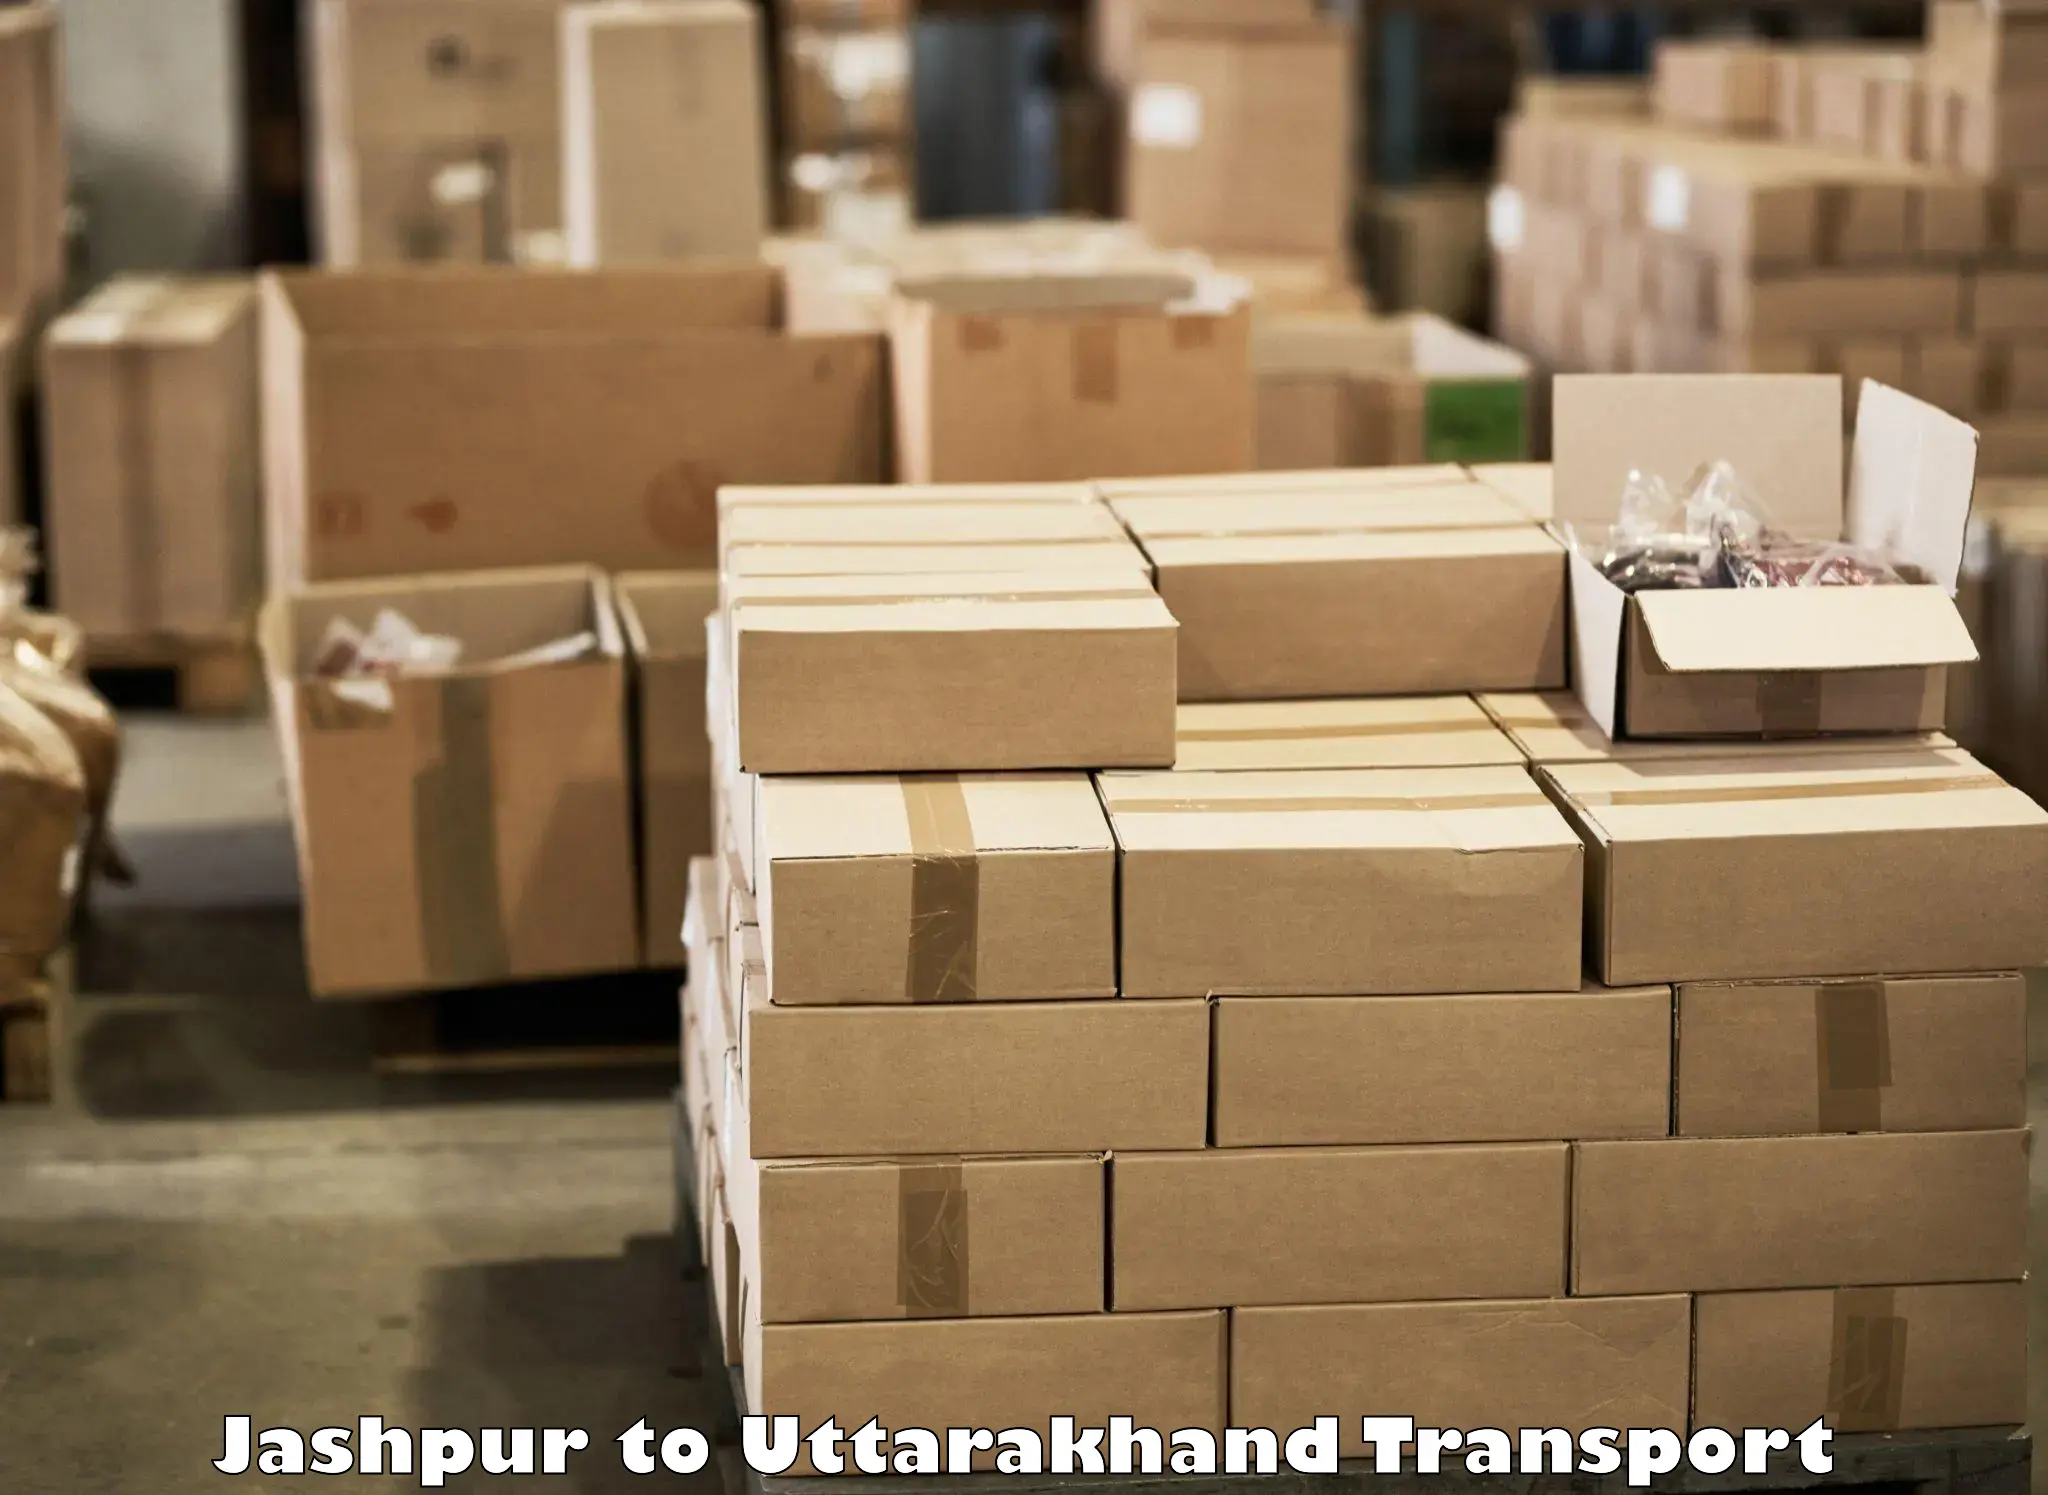 Air freight transport services in Jashpur to Khatima